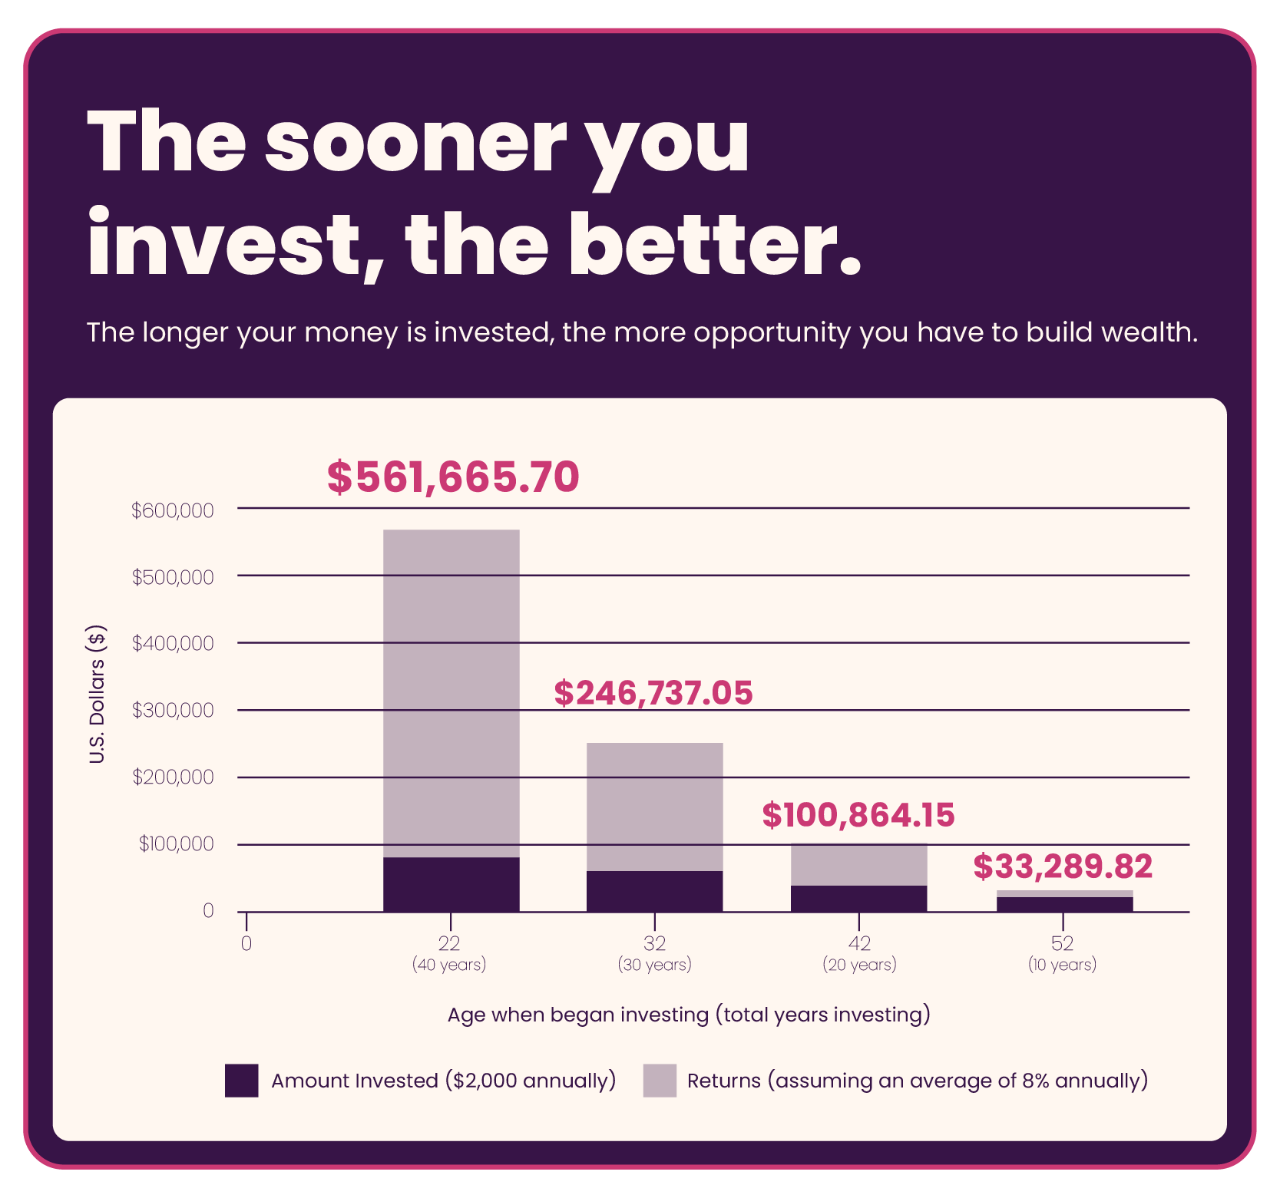 Graphic titled The sooner you invest, the better depicts the earning potential of invested amounts over time (assuming an average of 8% annual growth), showing that the longer your money is invested, the more opportunity you have to build wealth. In the example, $2,000 invested annually starting at age 22 reaches $561,665 in 40 years. The same amount at age 32 for 30 years reaches $246,737.05. At age 42 for 20 years reaches $100,864.15. Finally, at age 52 for 10 years reaches $33,289.82.